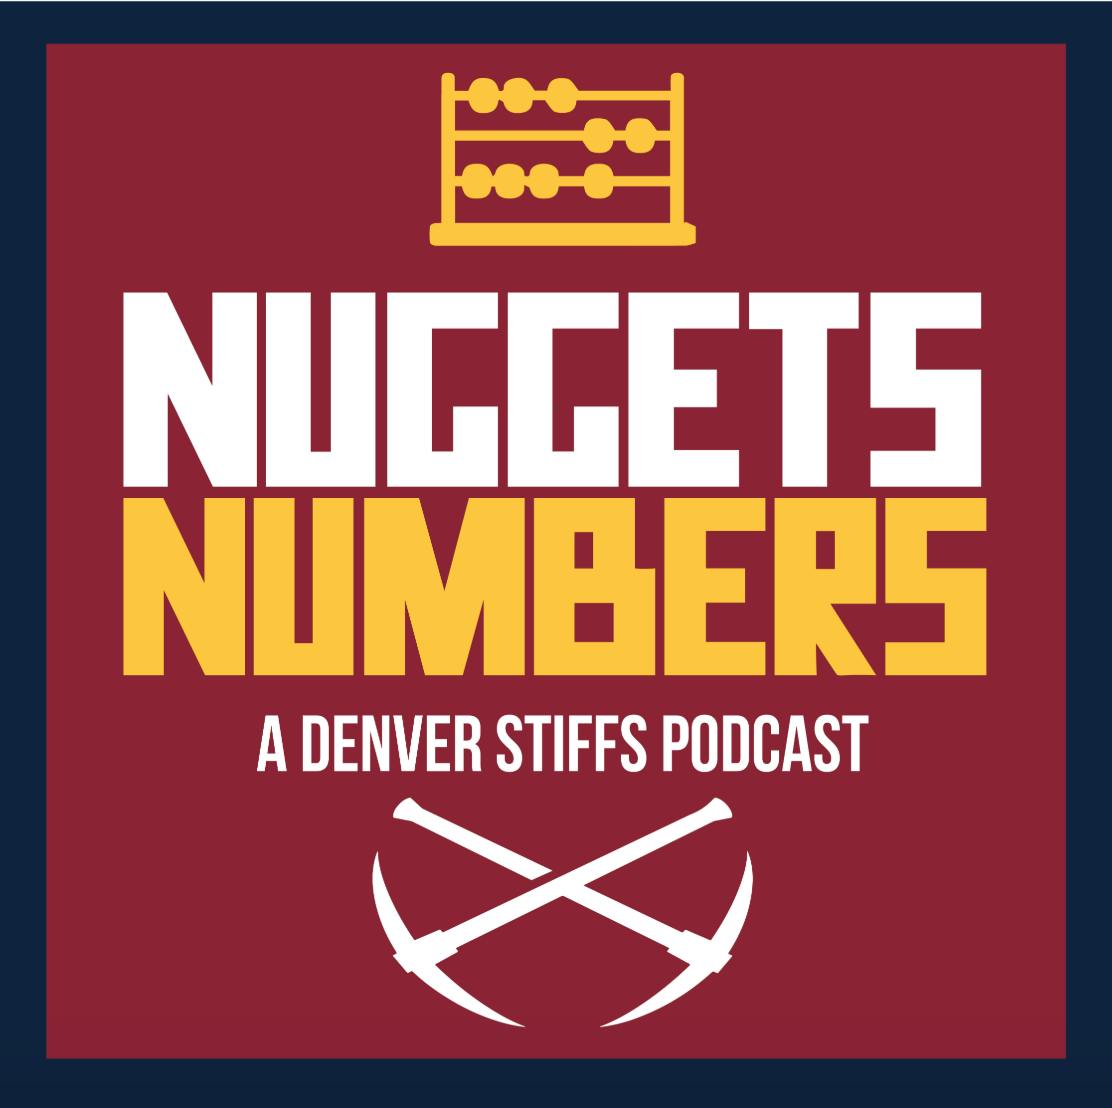 The Denver Nuggets answered some questions while creating new ones | Nuggets Numbers